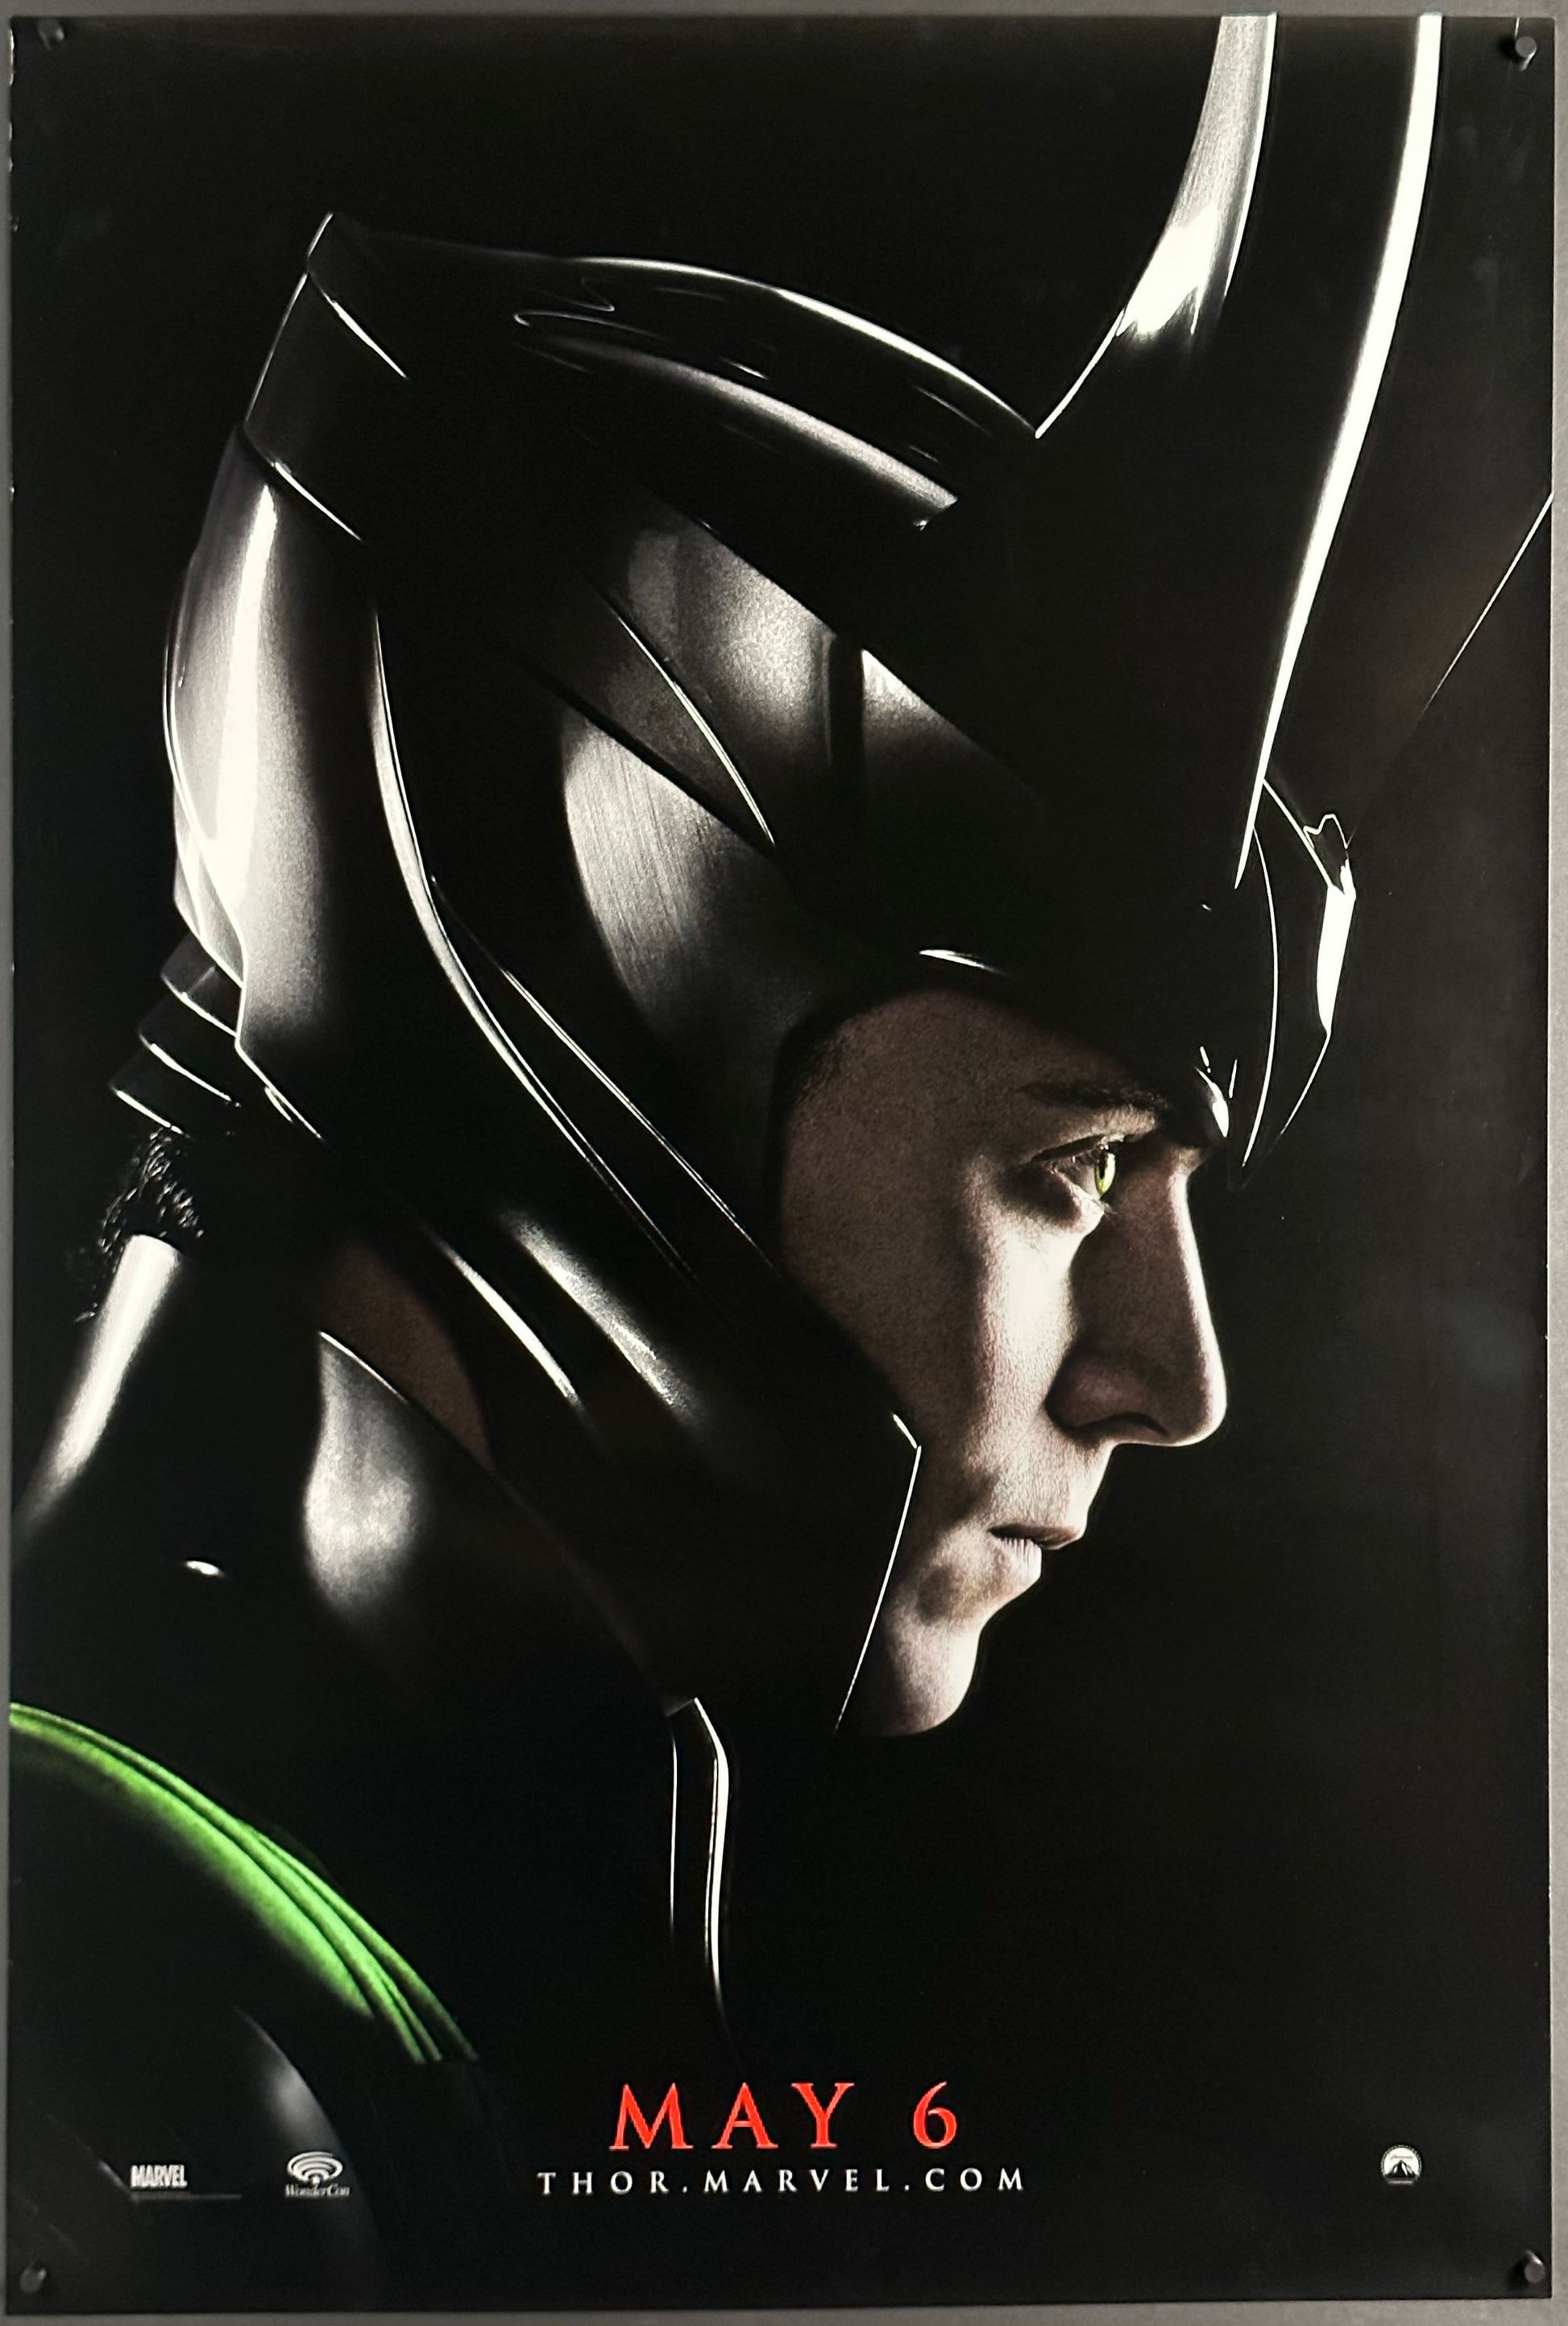 Thor US One Sheet "Loki" Teaser Style (2011) - ORIGINAL RELEASE - posterpalace.com